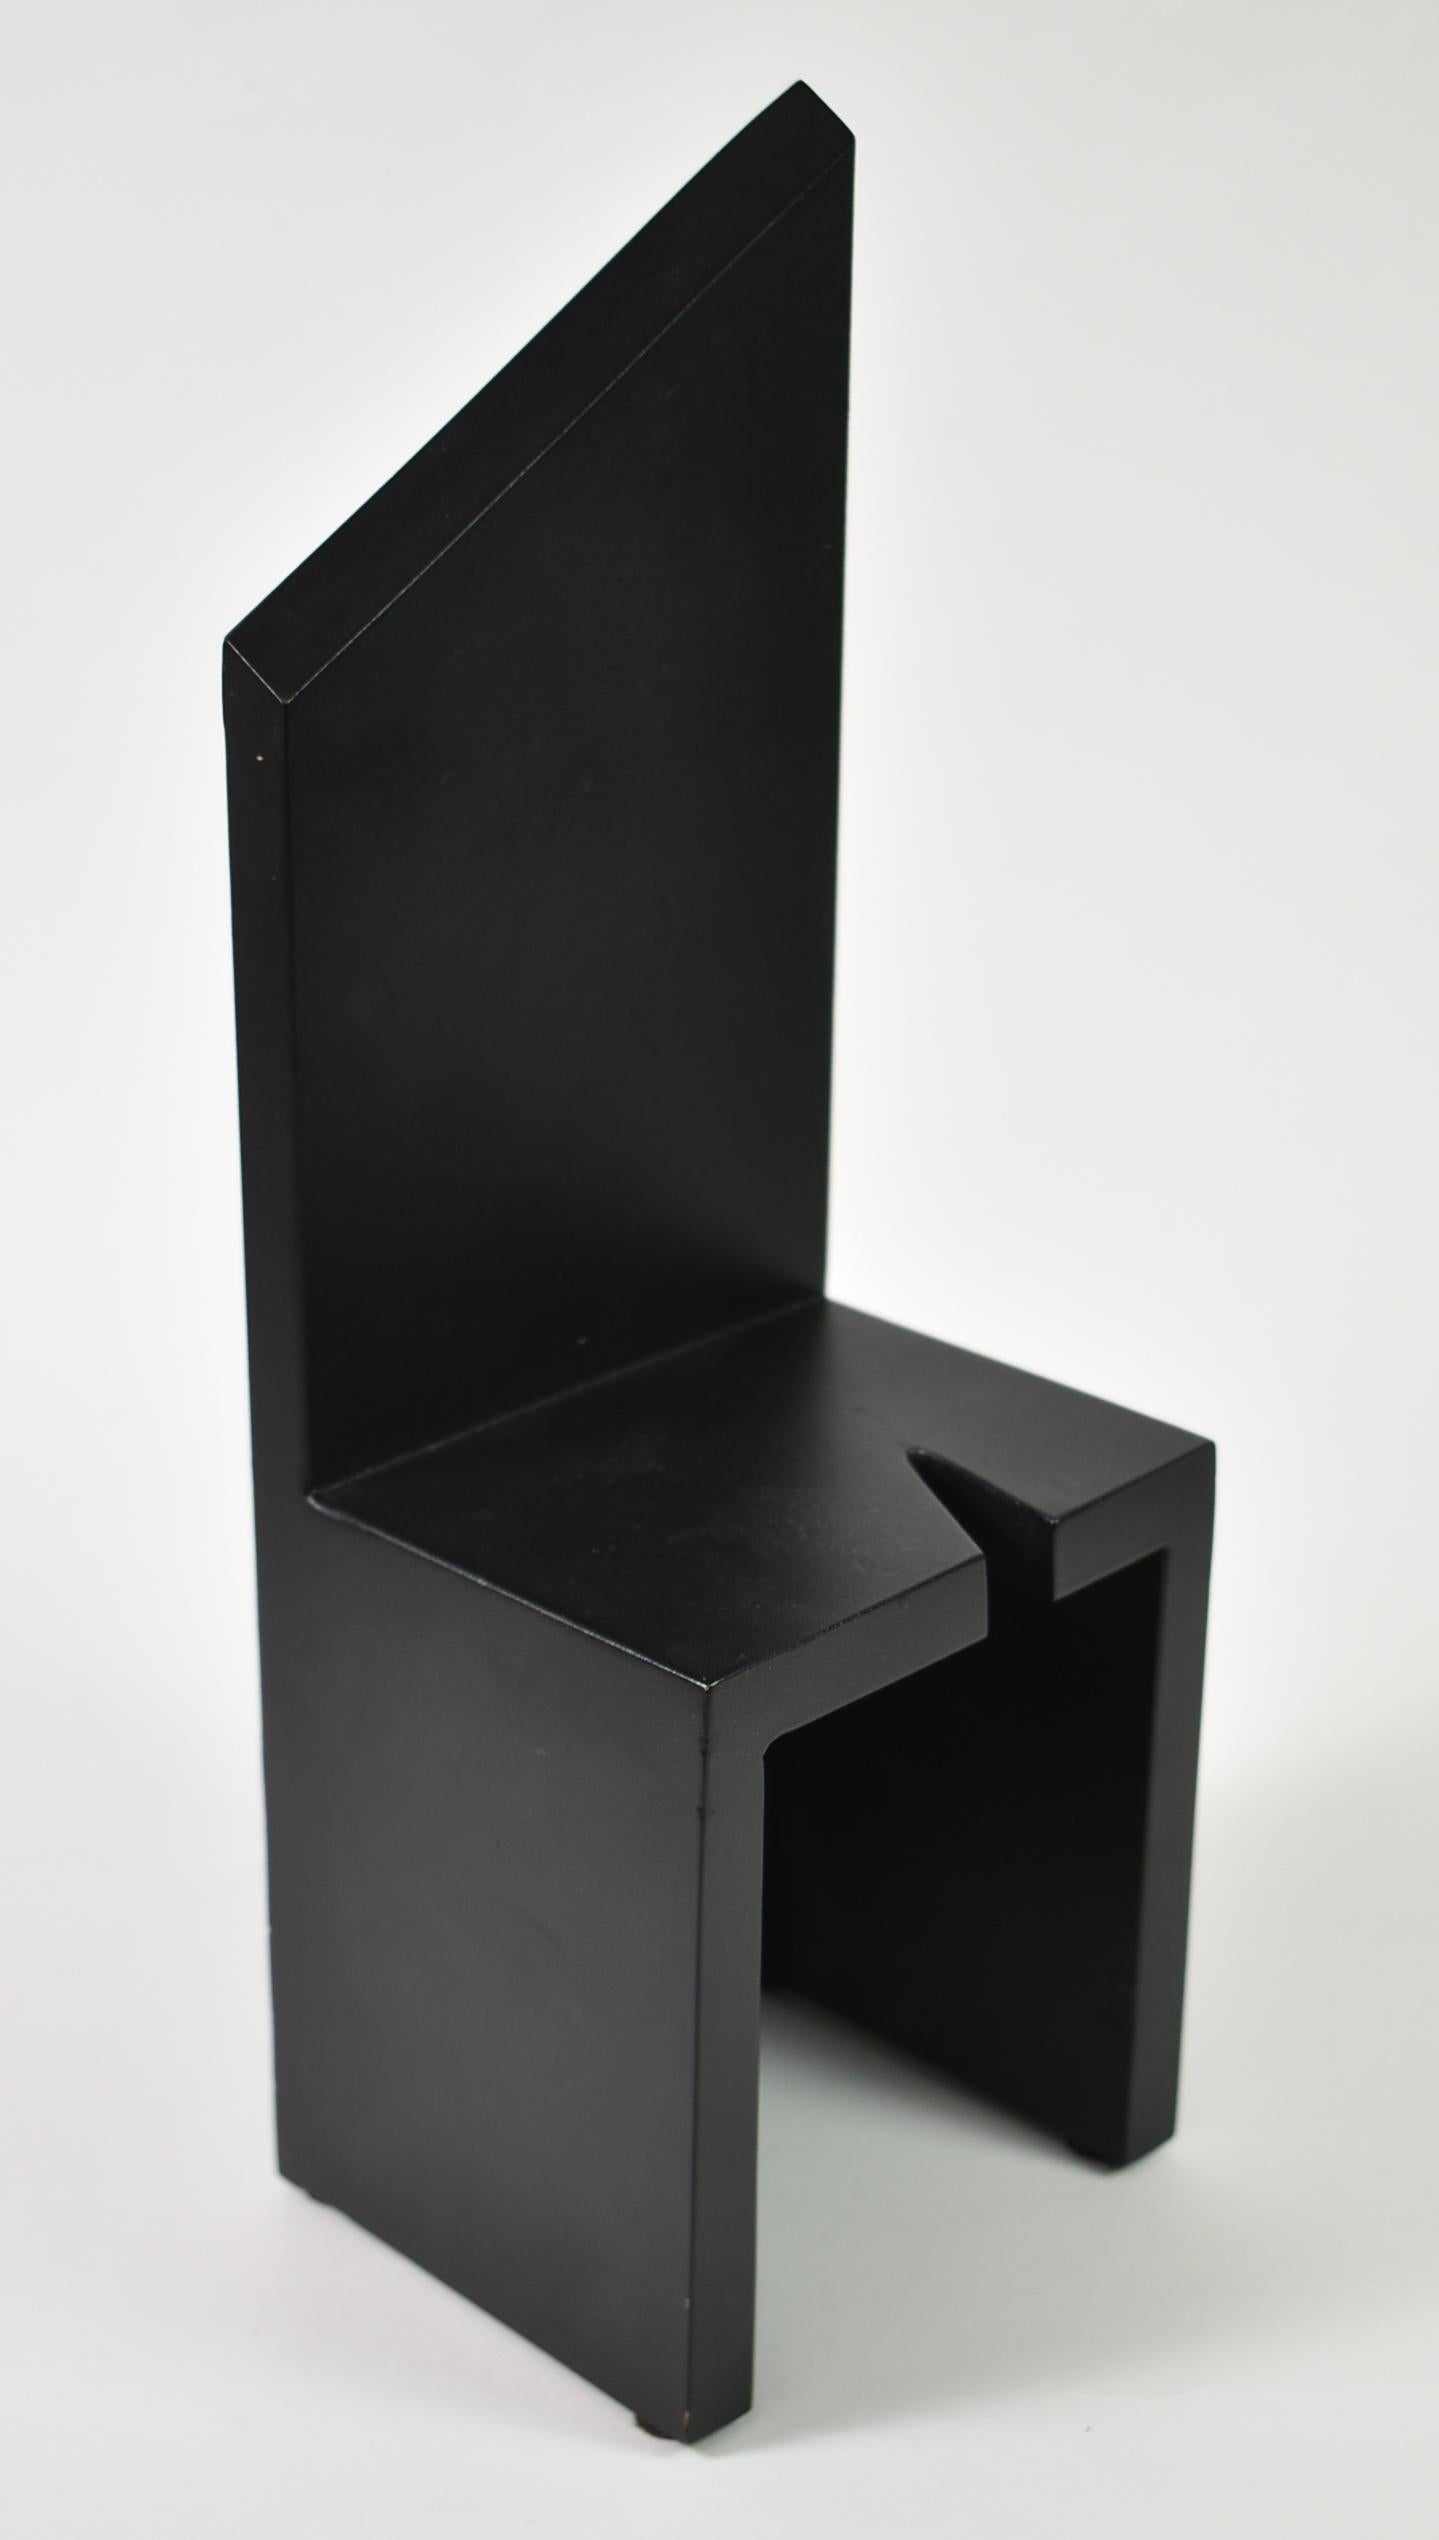 American Black Iron Chair Sculpture by Lois Teicher, 1992 For Sale